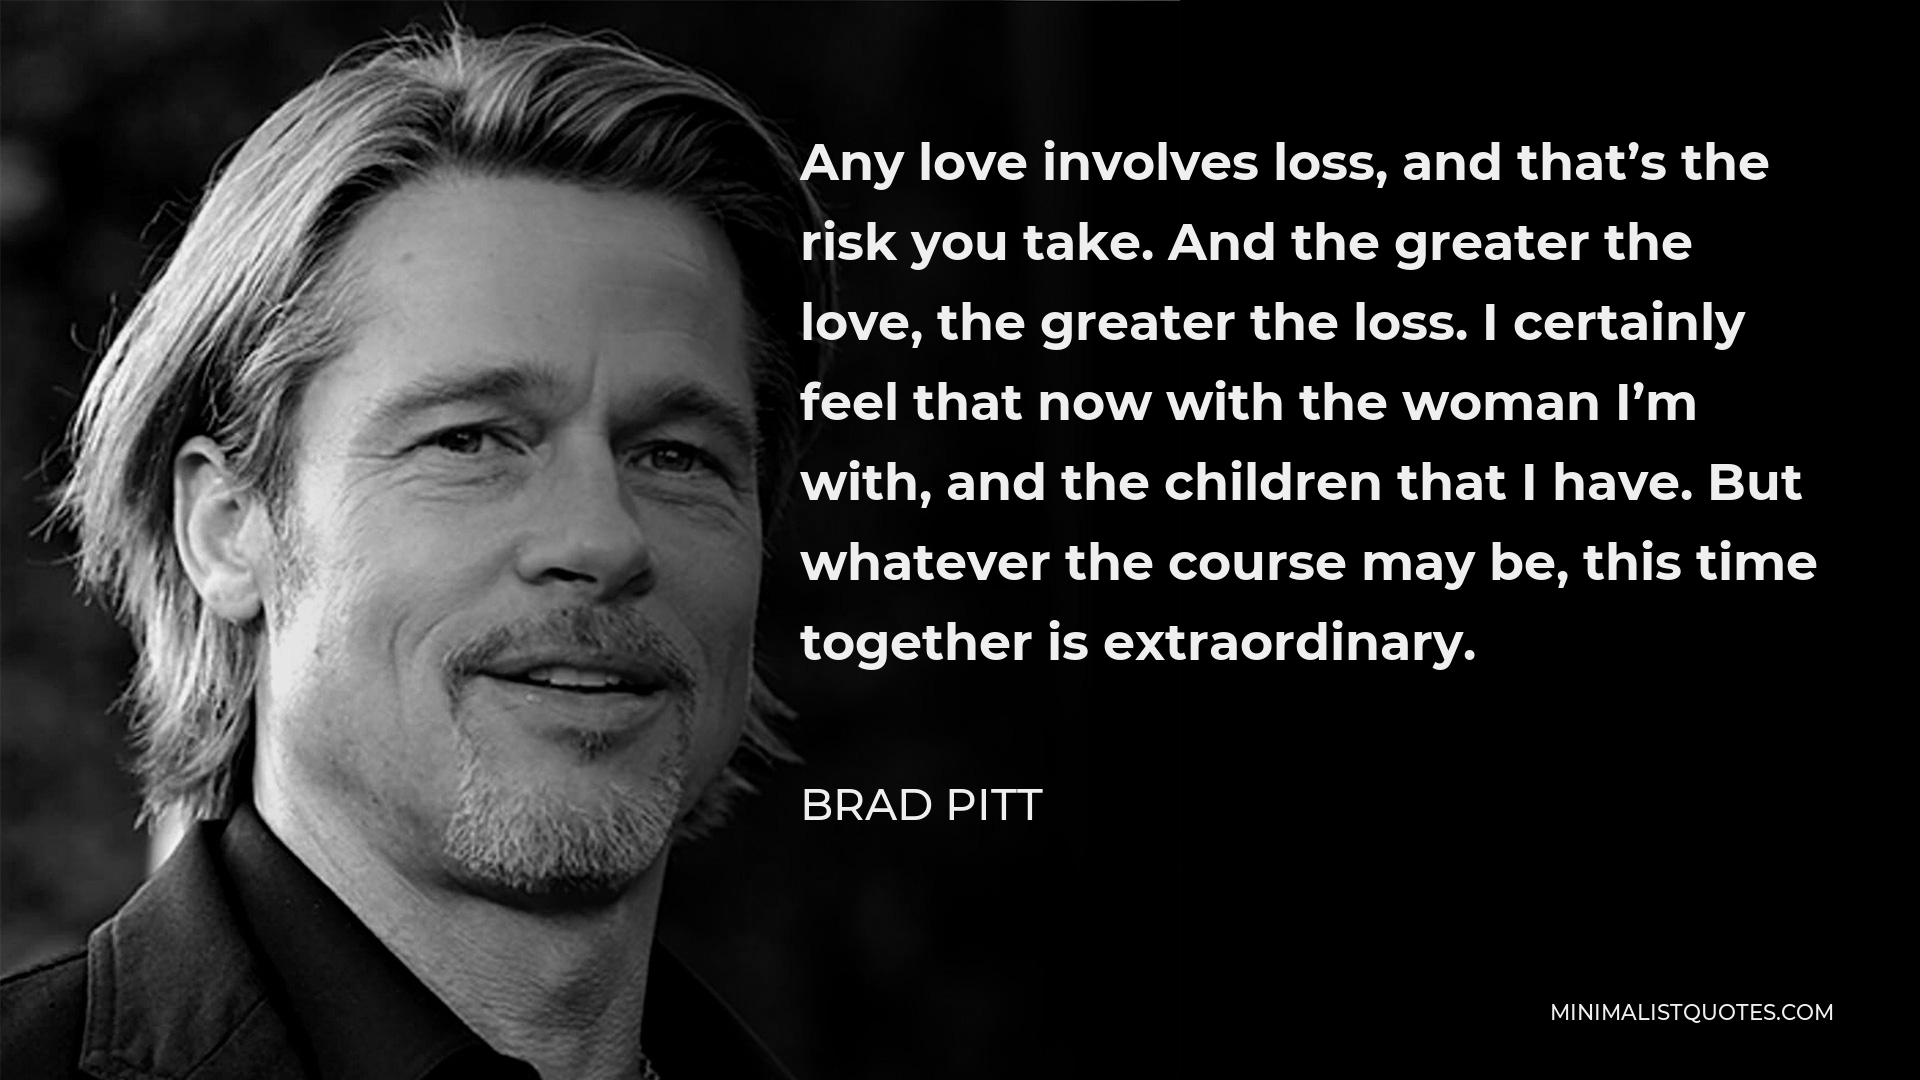 Brad Pitt Quote - Any love involves loss, and that’s the risk you take. And the greater the love, the greater the loss. I certainly feel that now with the woman I’m with, and the children that I have. But whatever the course may be, this time together is extraordinary.